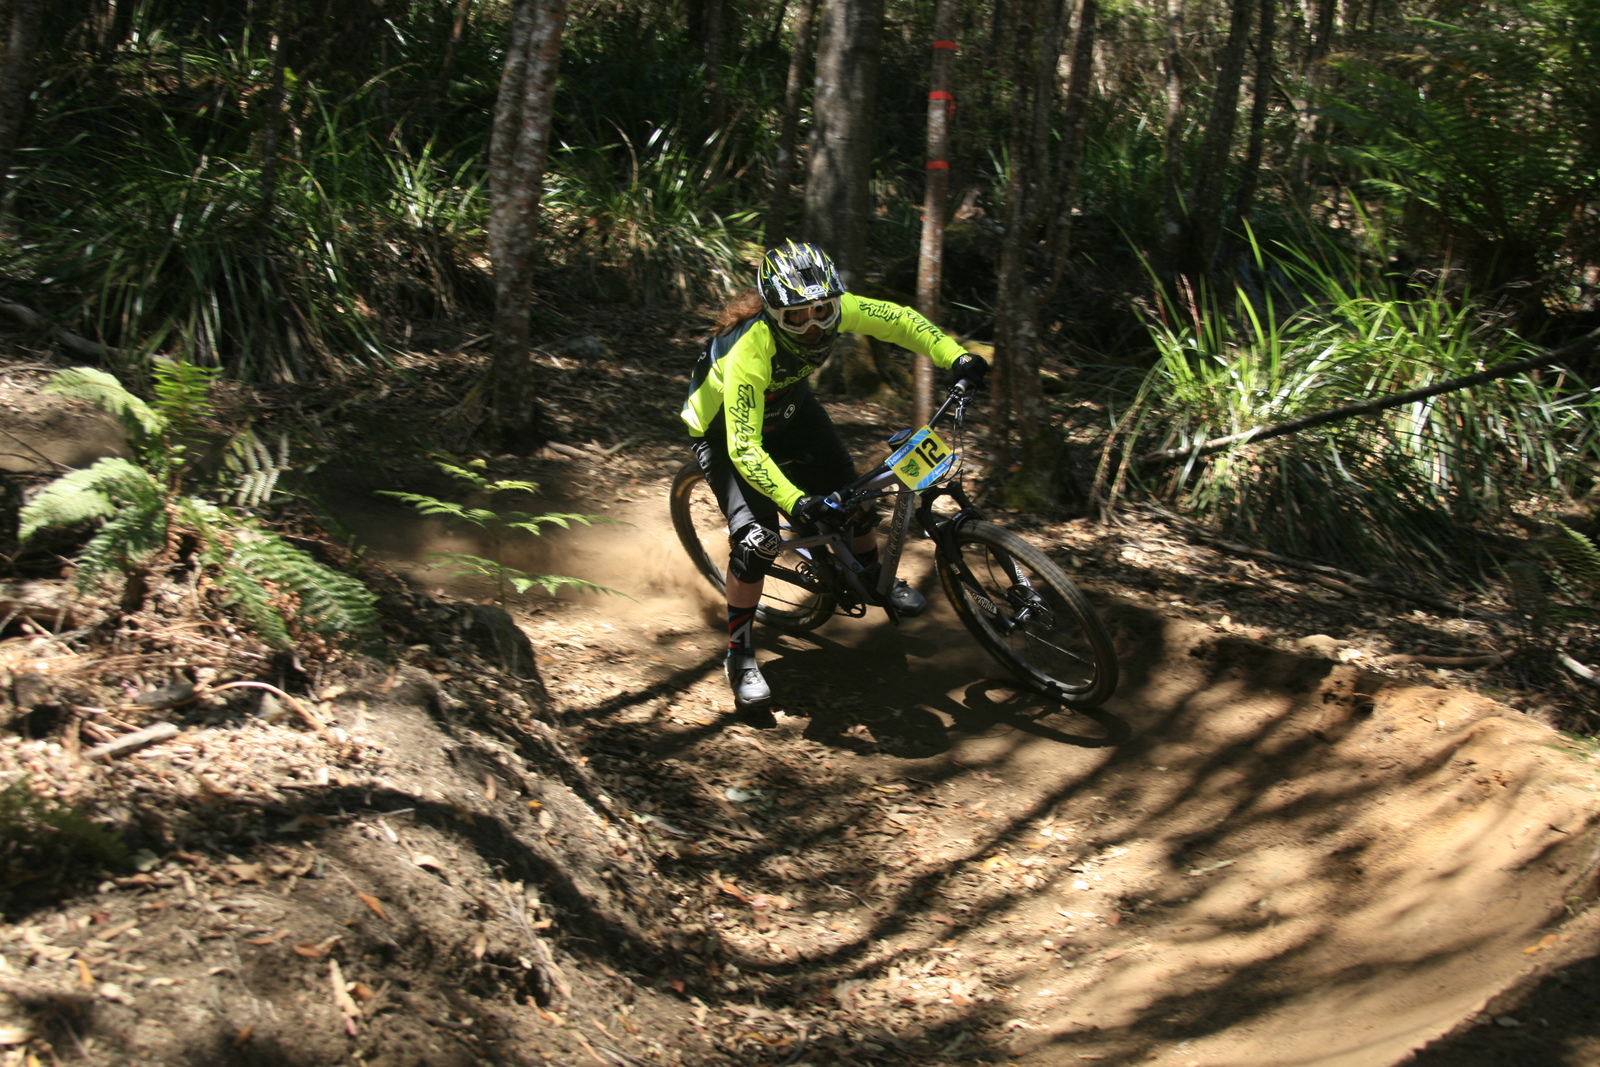 High in the berm, Schapel on her way to securing the overall series title in the TAS Gravity Enduro Series.